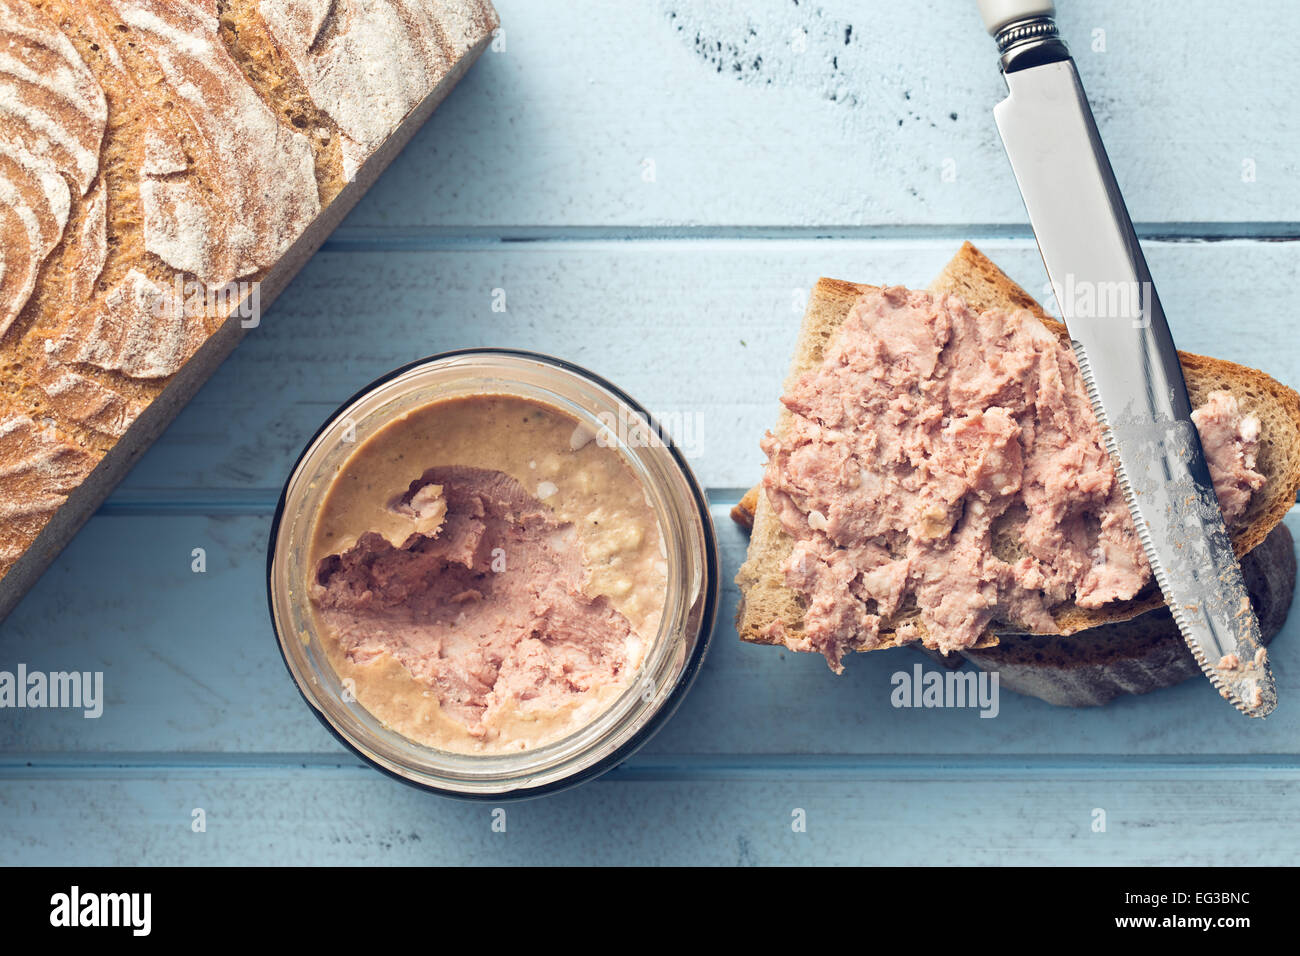 the pate with bread on kitchen table Stock Photo